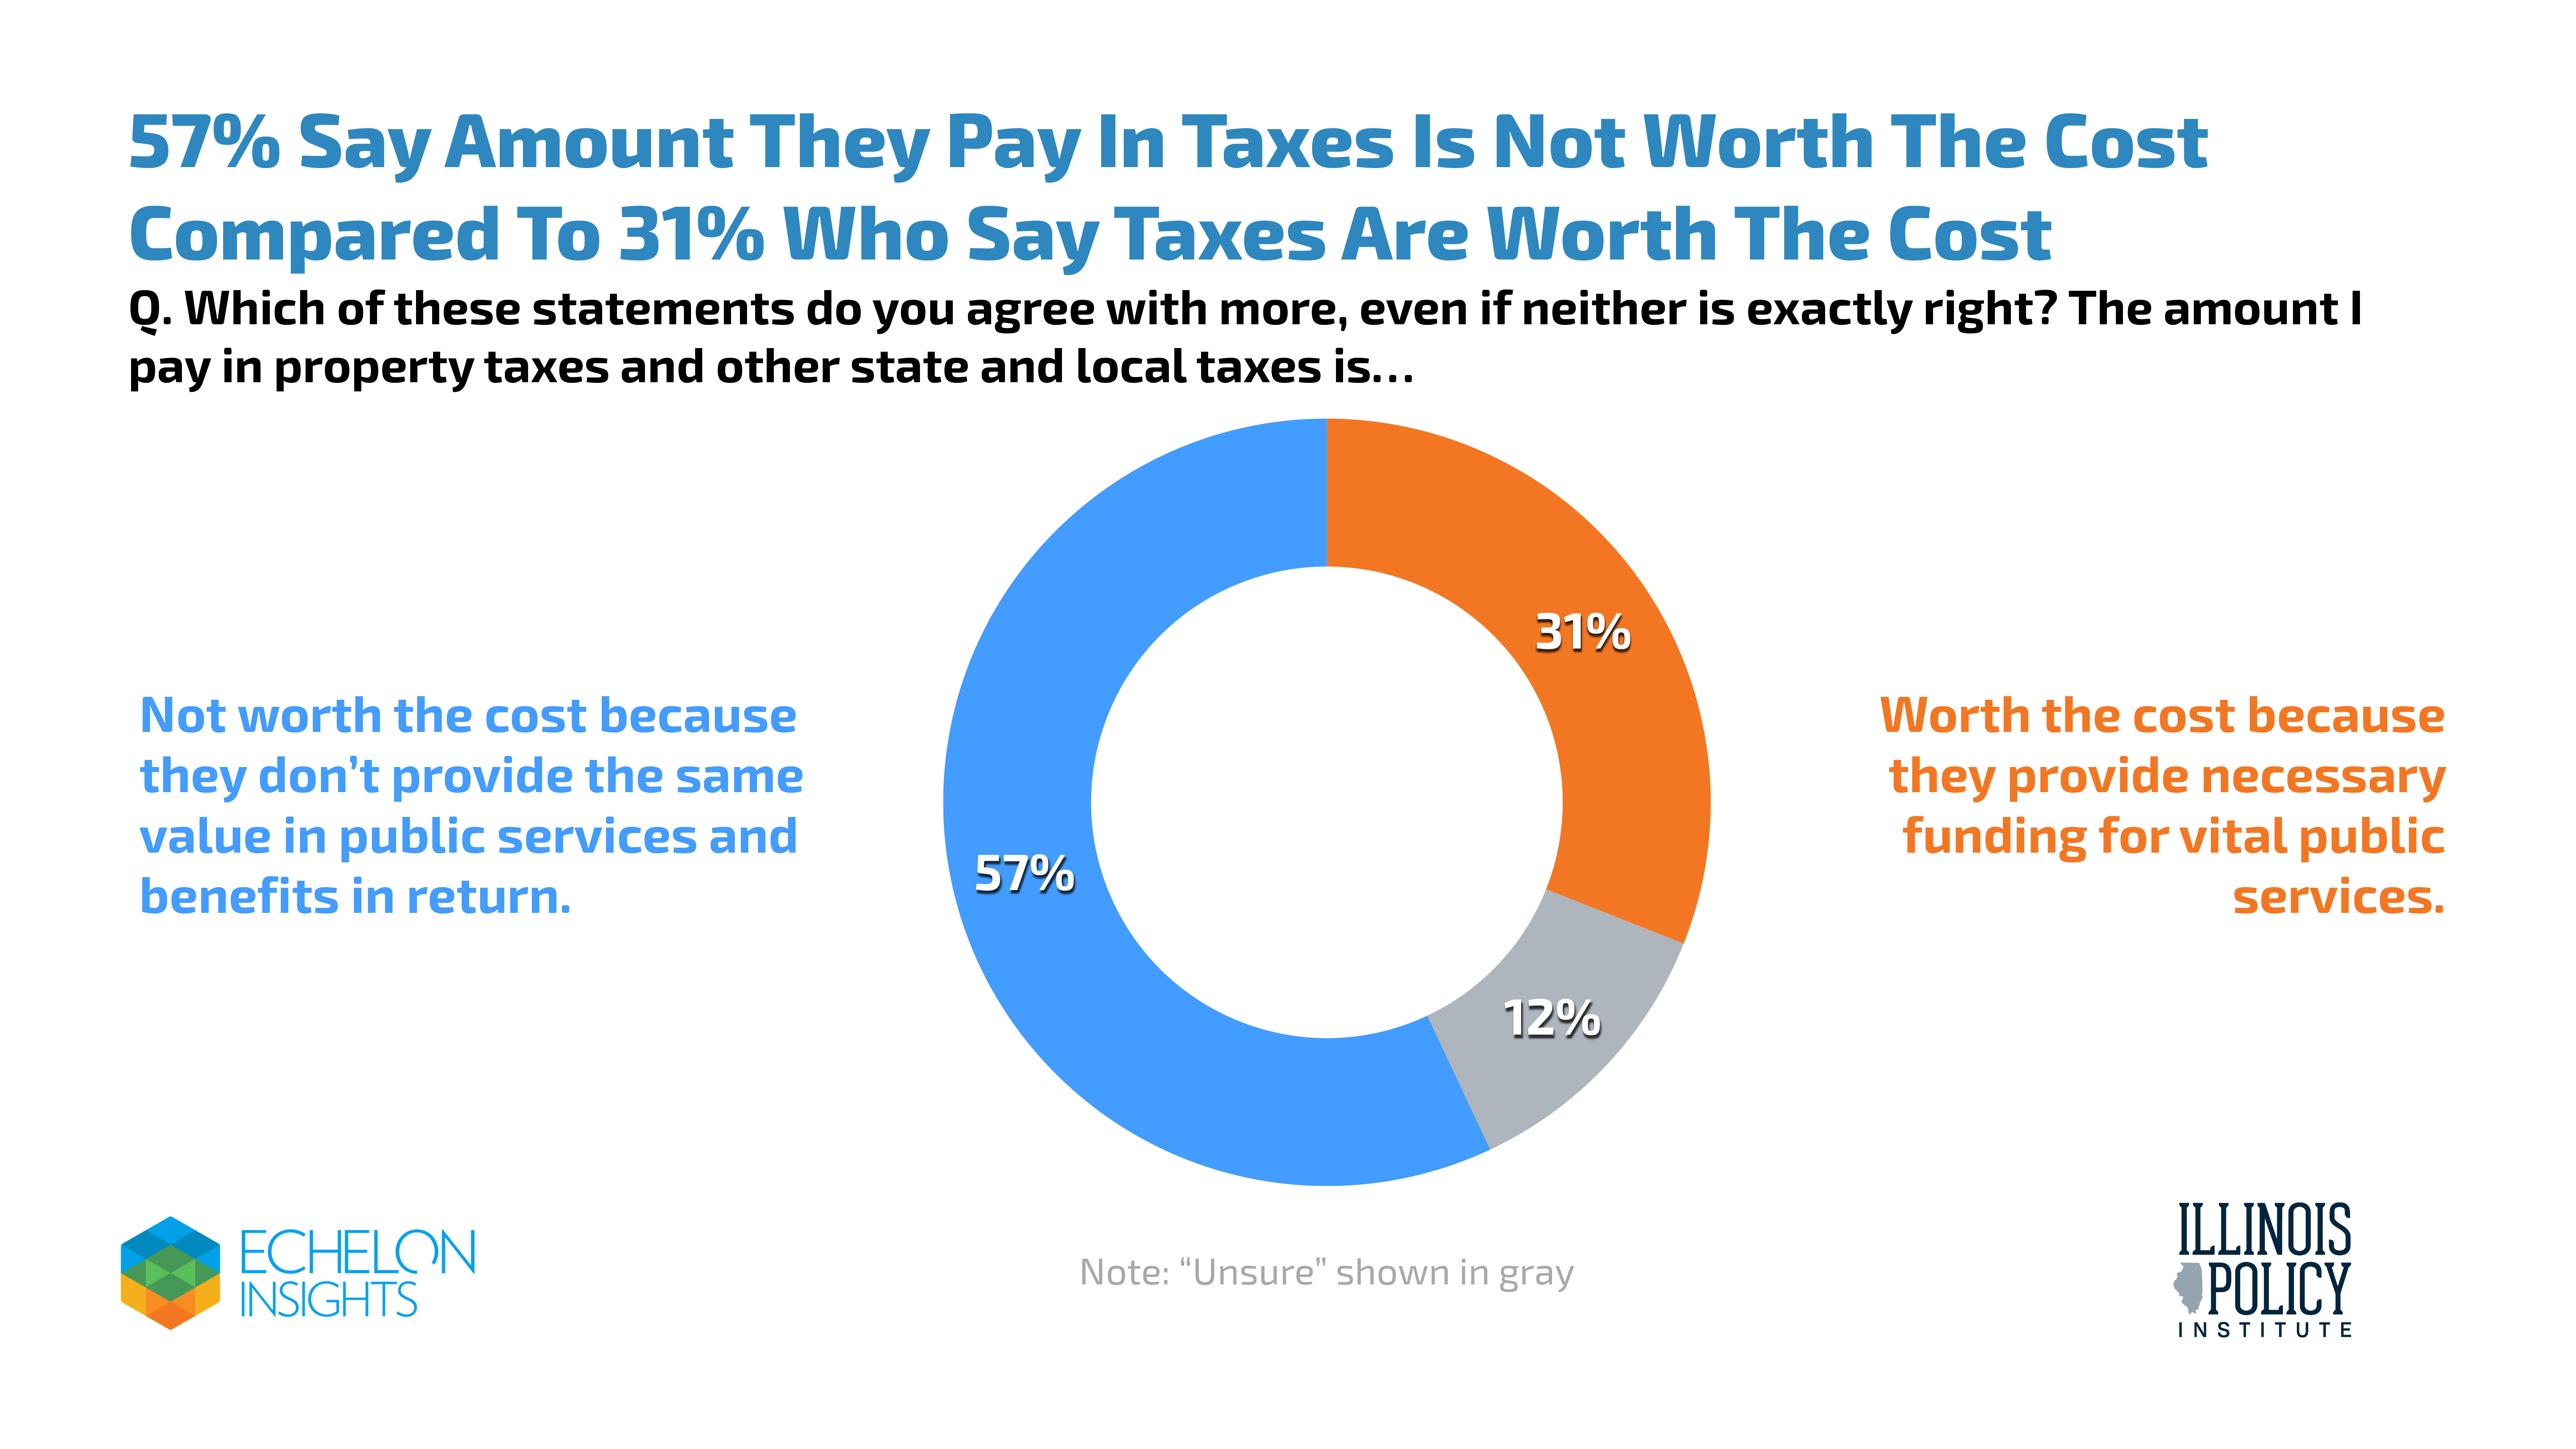 57% Say Amount They Pay In Taxes Is Not Worth The Cost Compared To 31% Who Say Taxes Are Worth The Cost